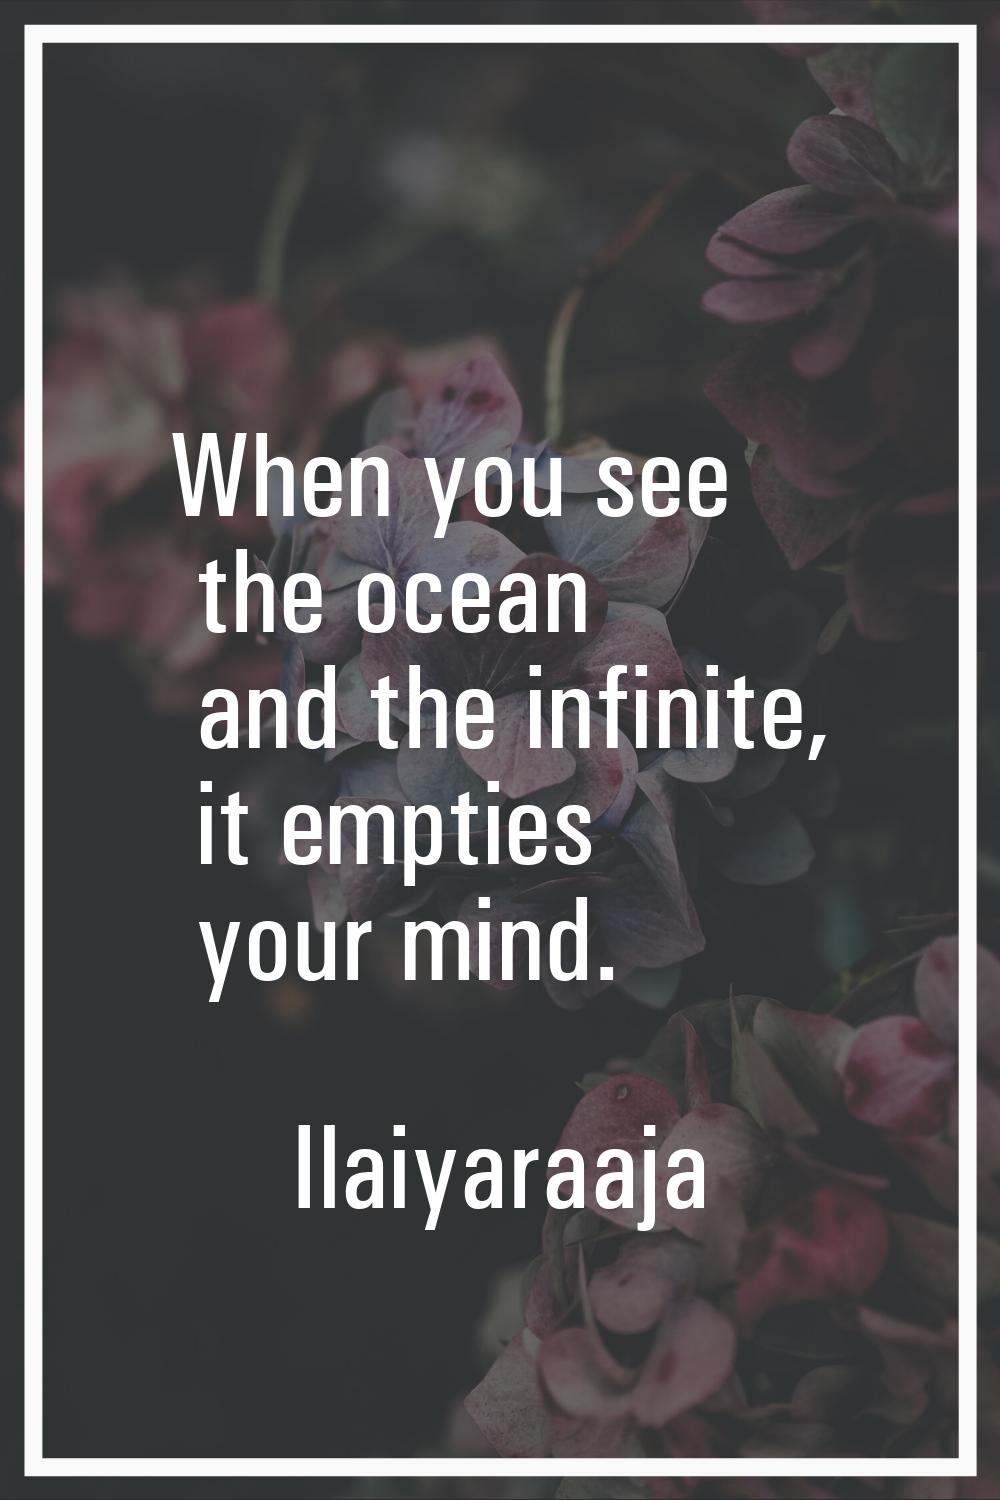 When you see the ocean and the infinite, it empties your mind.